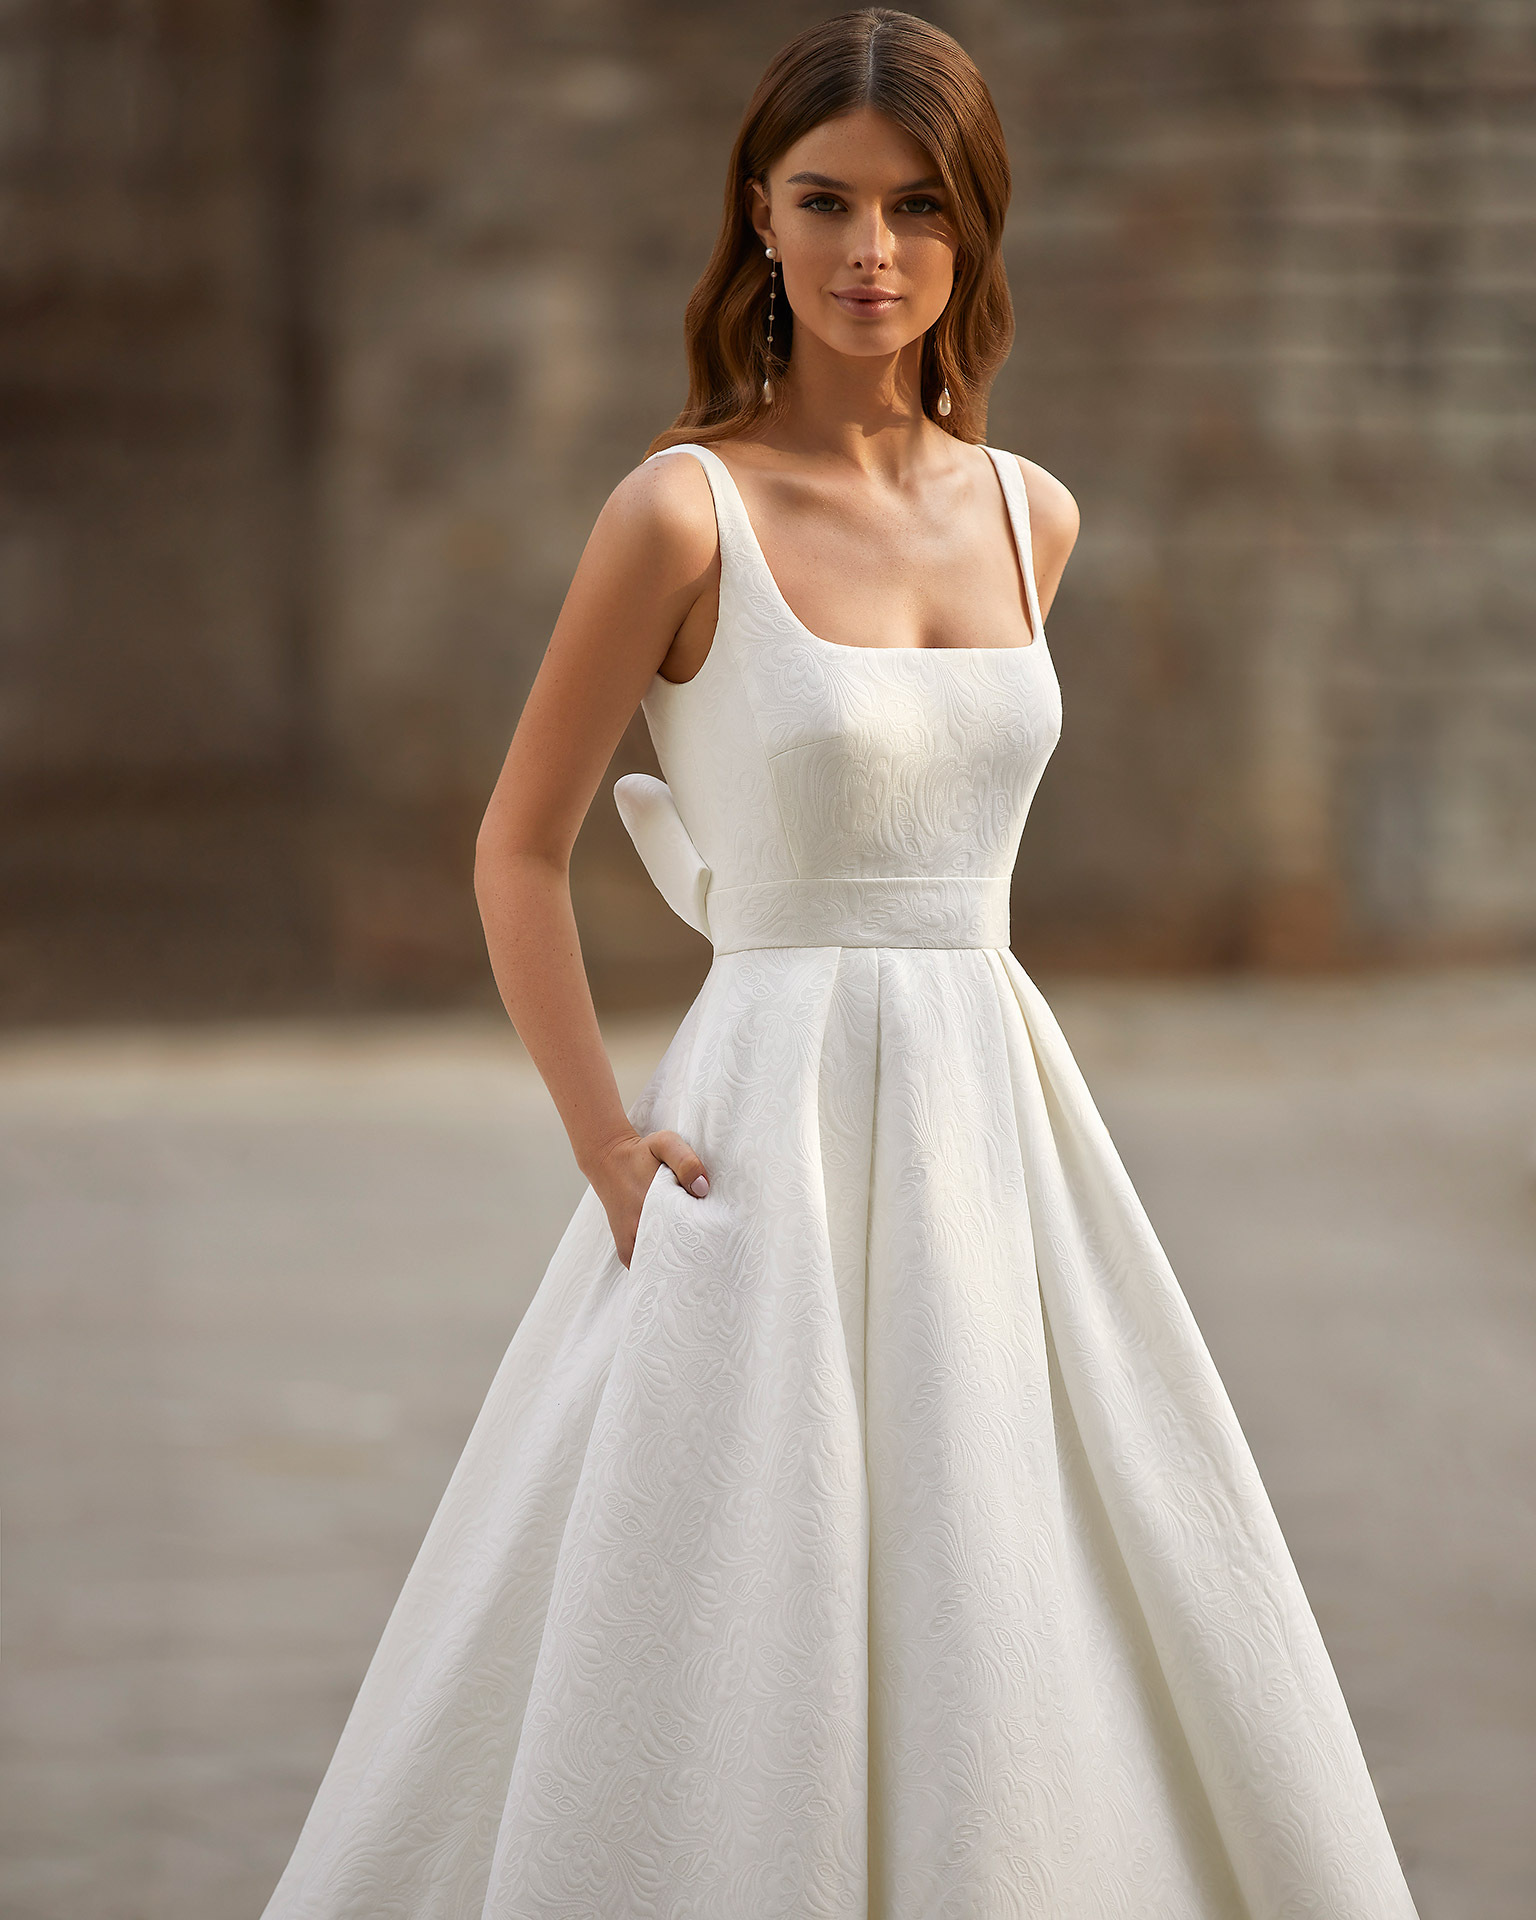 Classic-style wedding dress, made of Veneto brocade, with a voluminous sheath-style skirt; with a square neckline, an open back, and a bow at the back. Unique Luna Novias design made entirely of Veneto brocade. LUNA_NOVIAS.